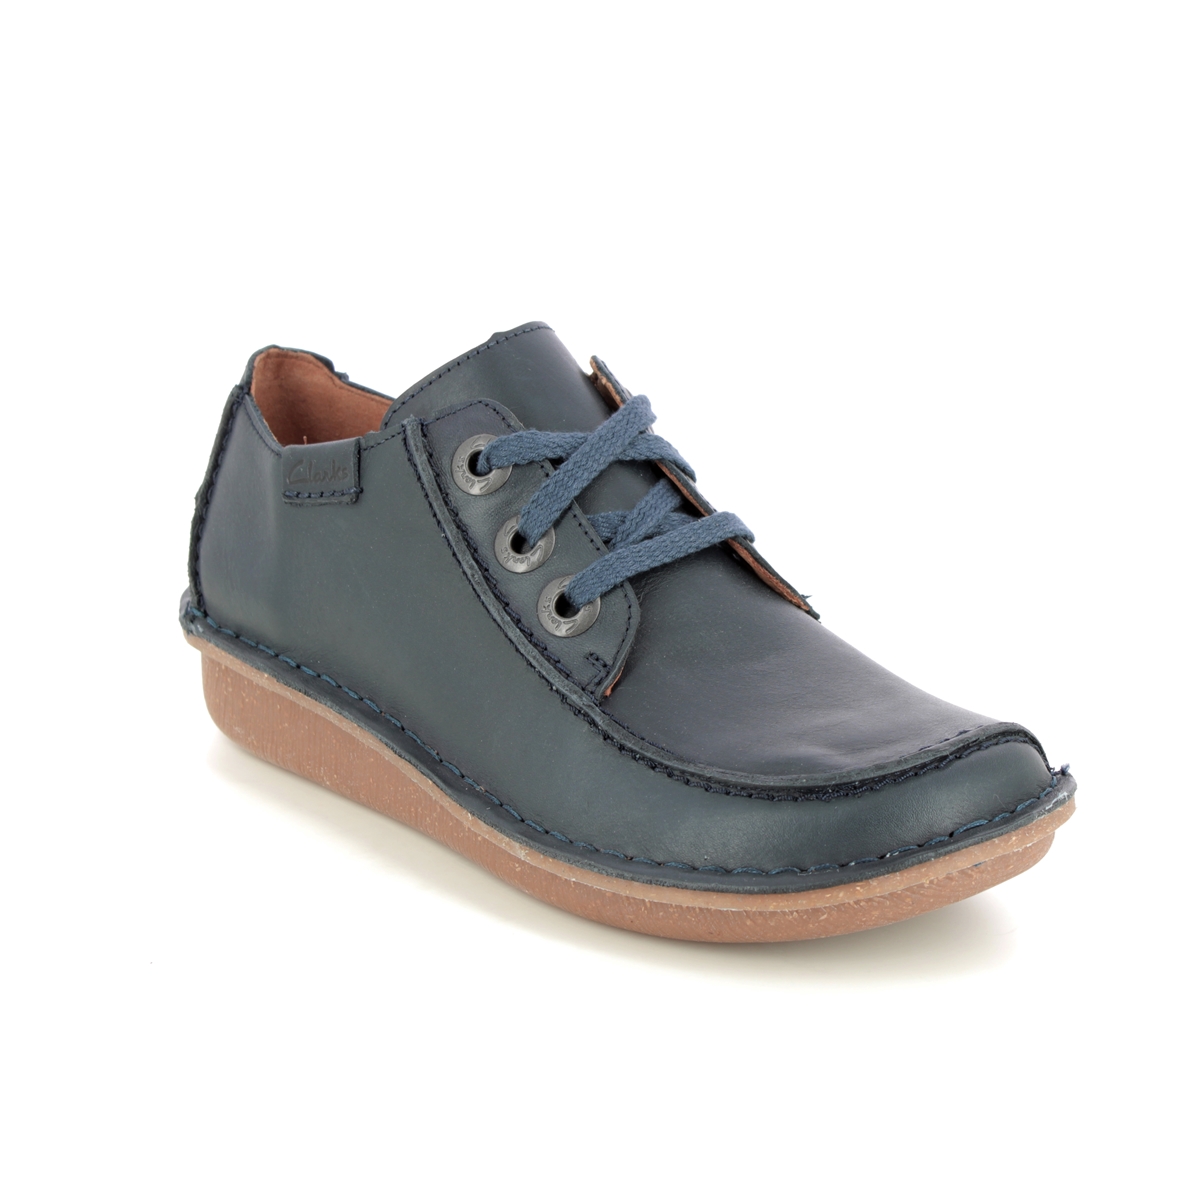 Clarks Funny Dream Navy Leather Womens Lacing Shoes 668184D In Size 4.5 In Plain Navy Leather